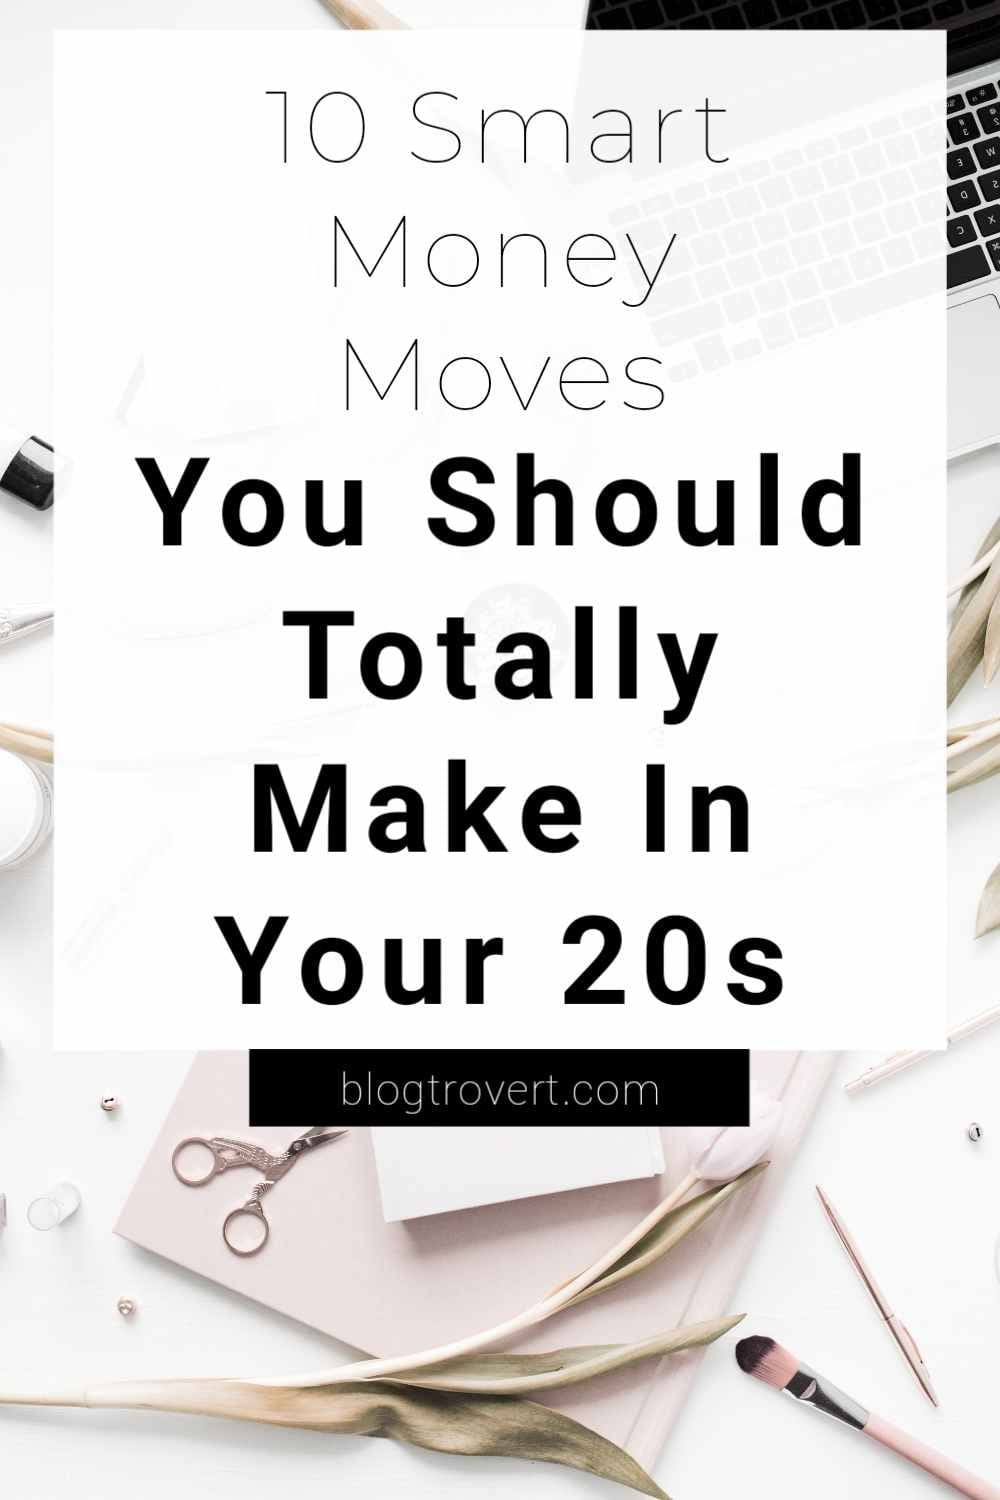 10 Smart Money Moves to Make in Your 20s for a better future 2